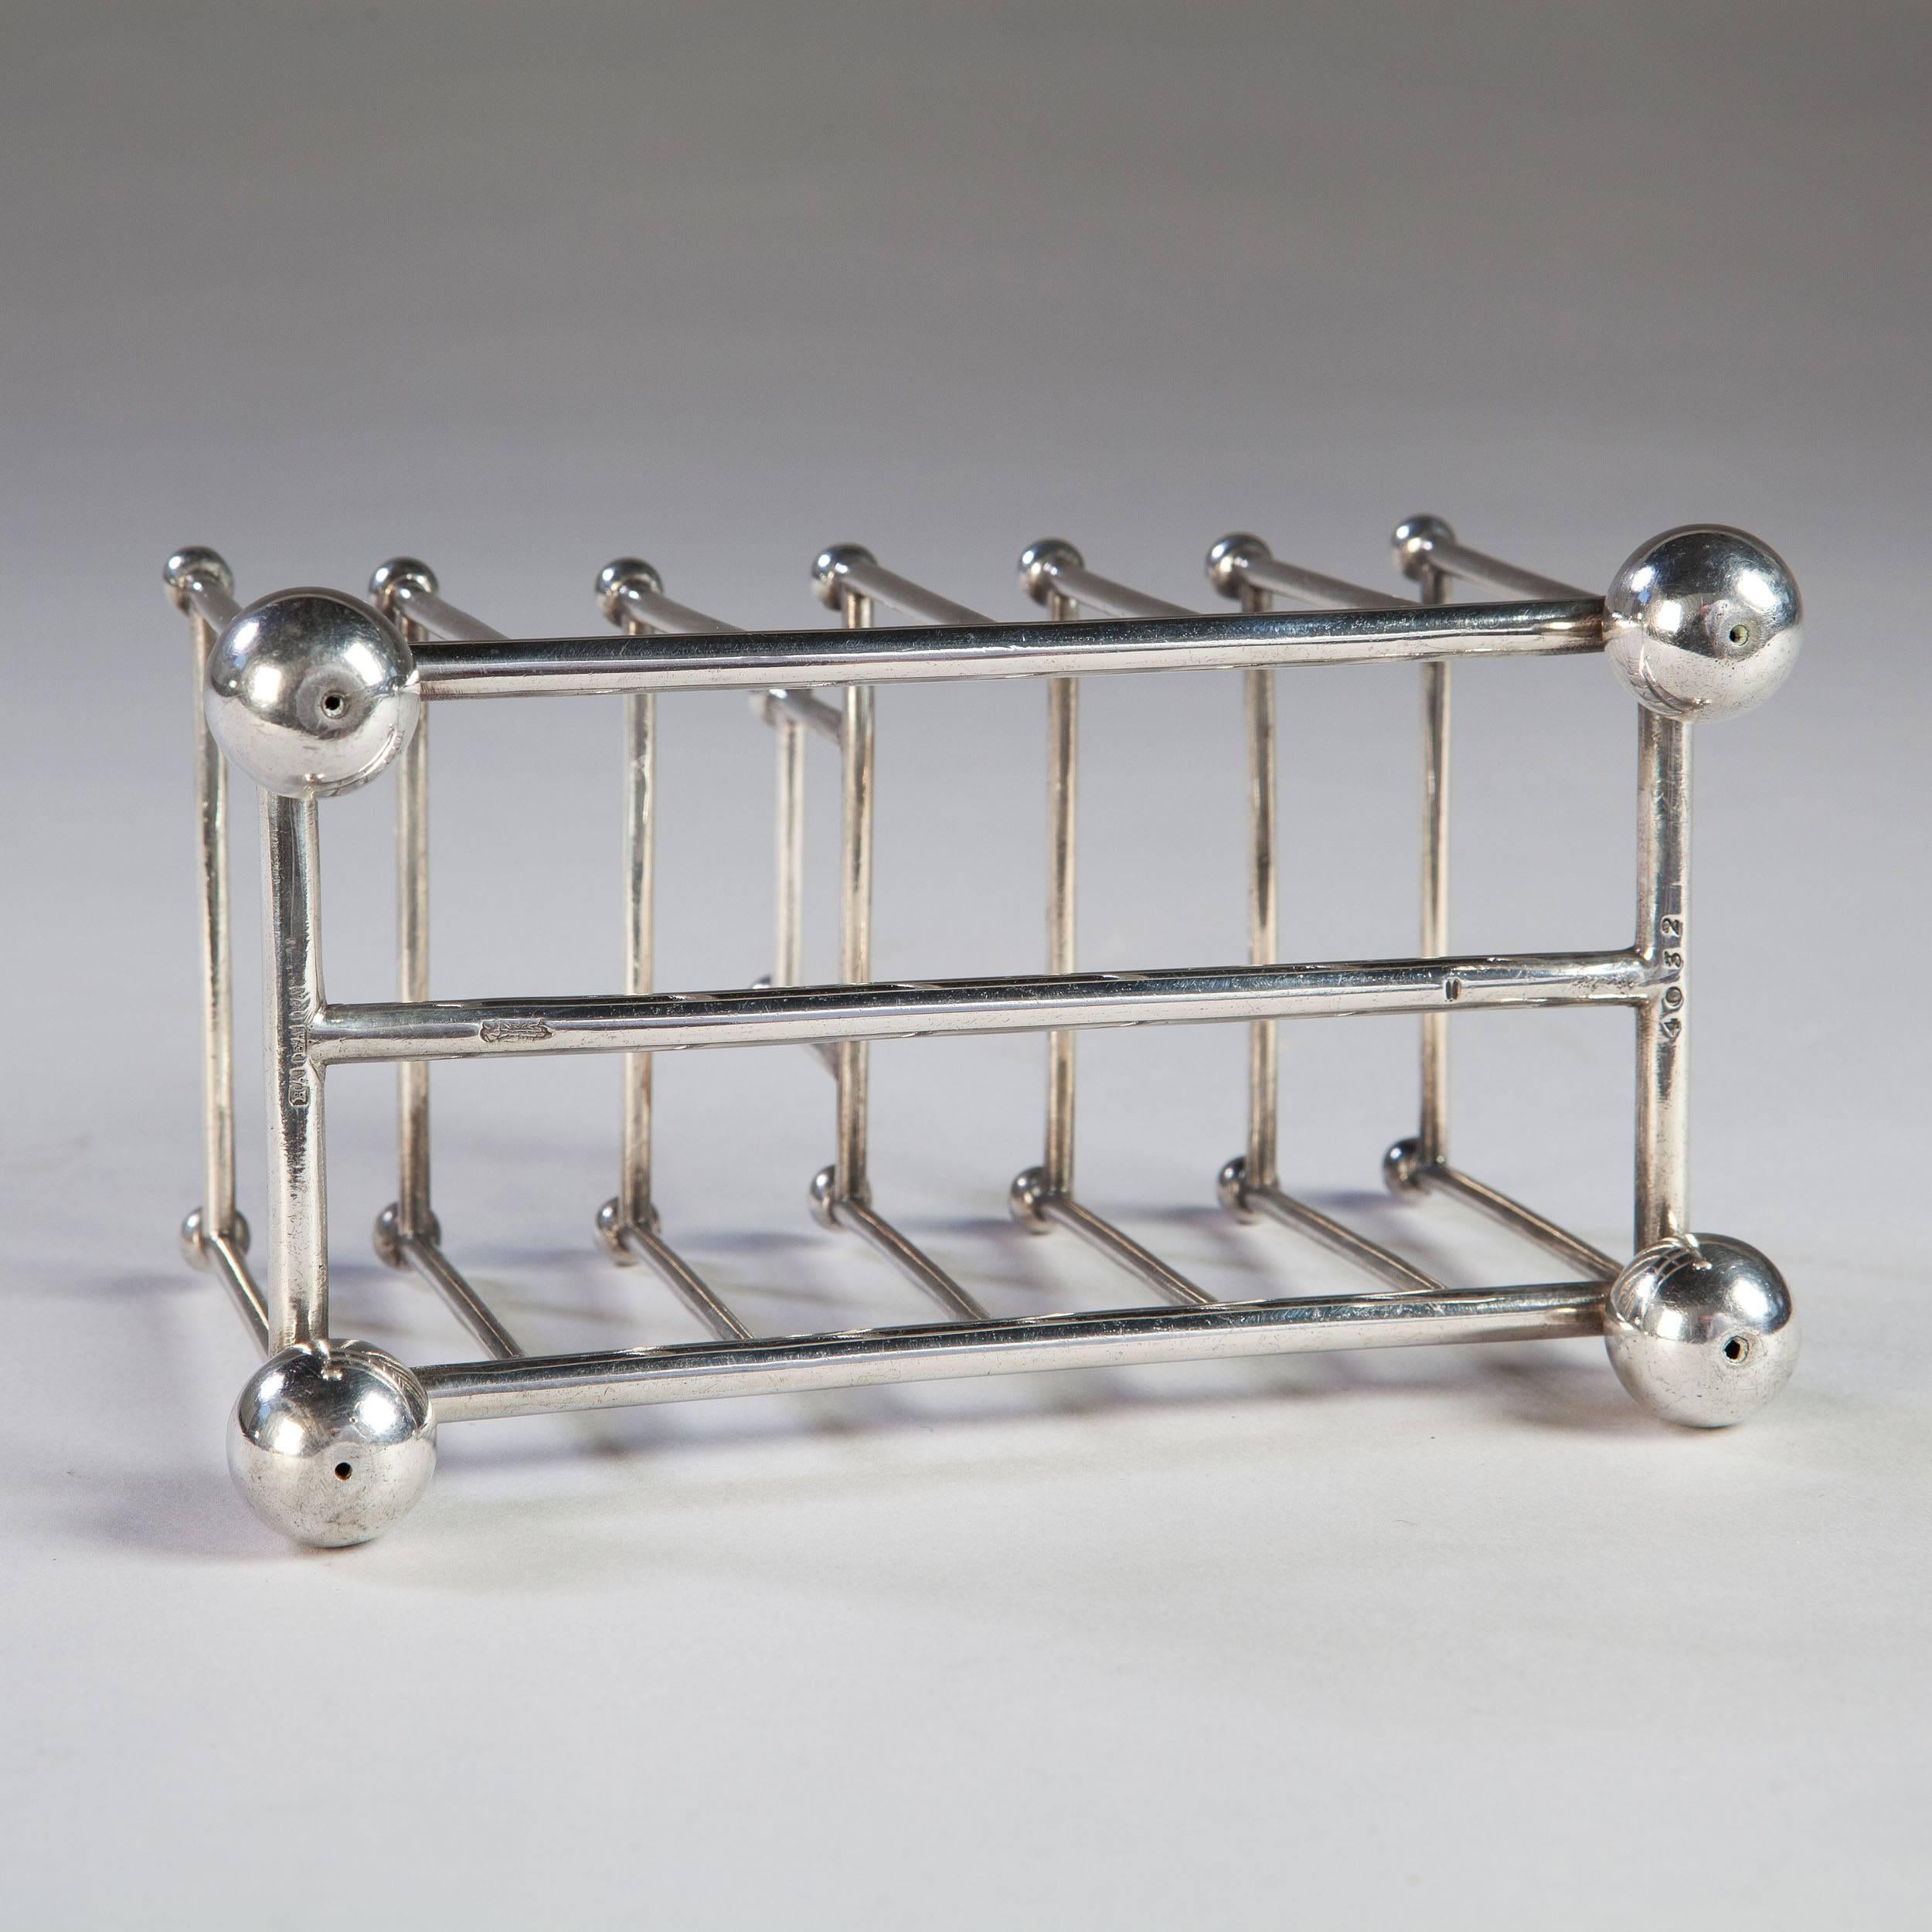 An early 20th century silver plated toast rack, attributed to Christopher Dresser.